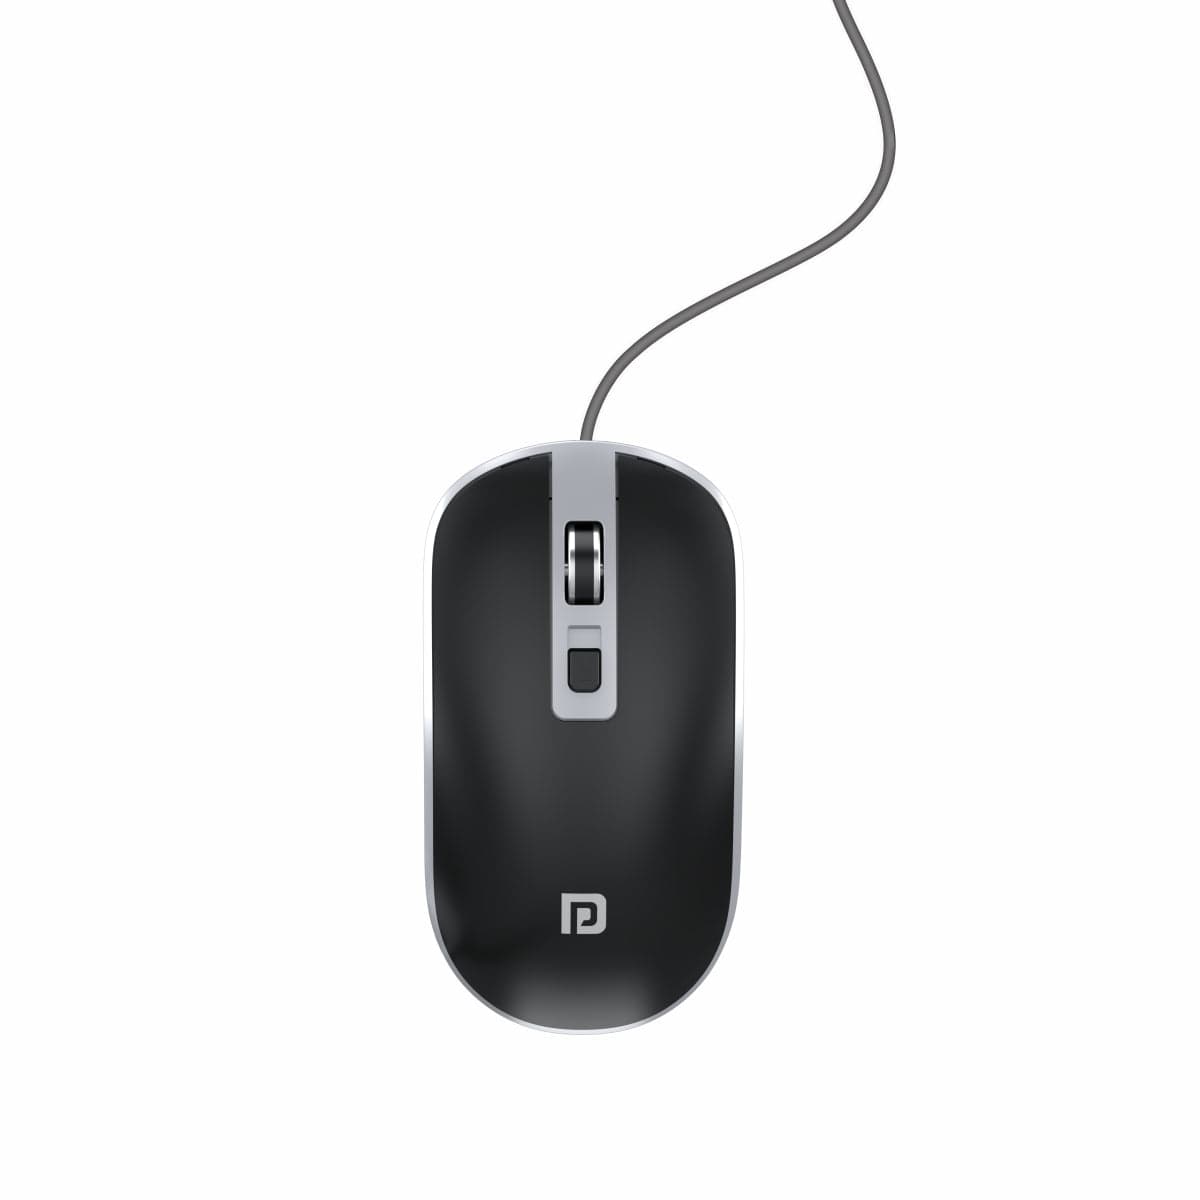 PORTRONICS-Toad 21 Optical Wired Mouse